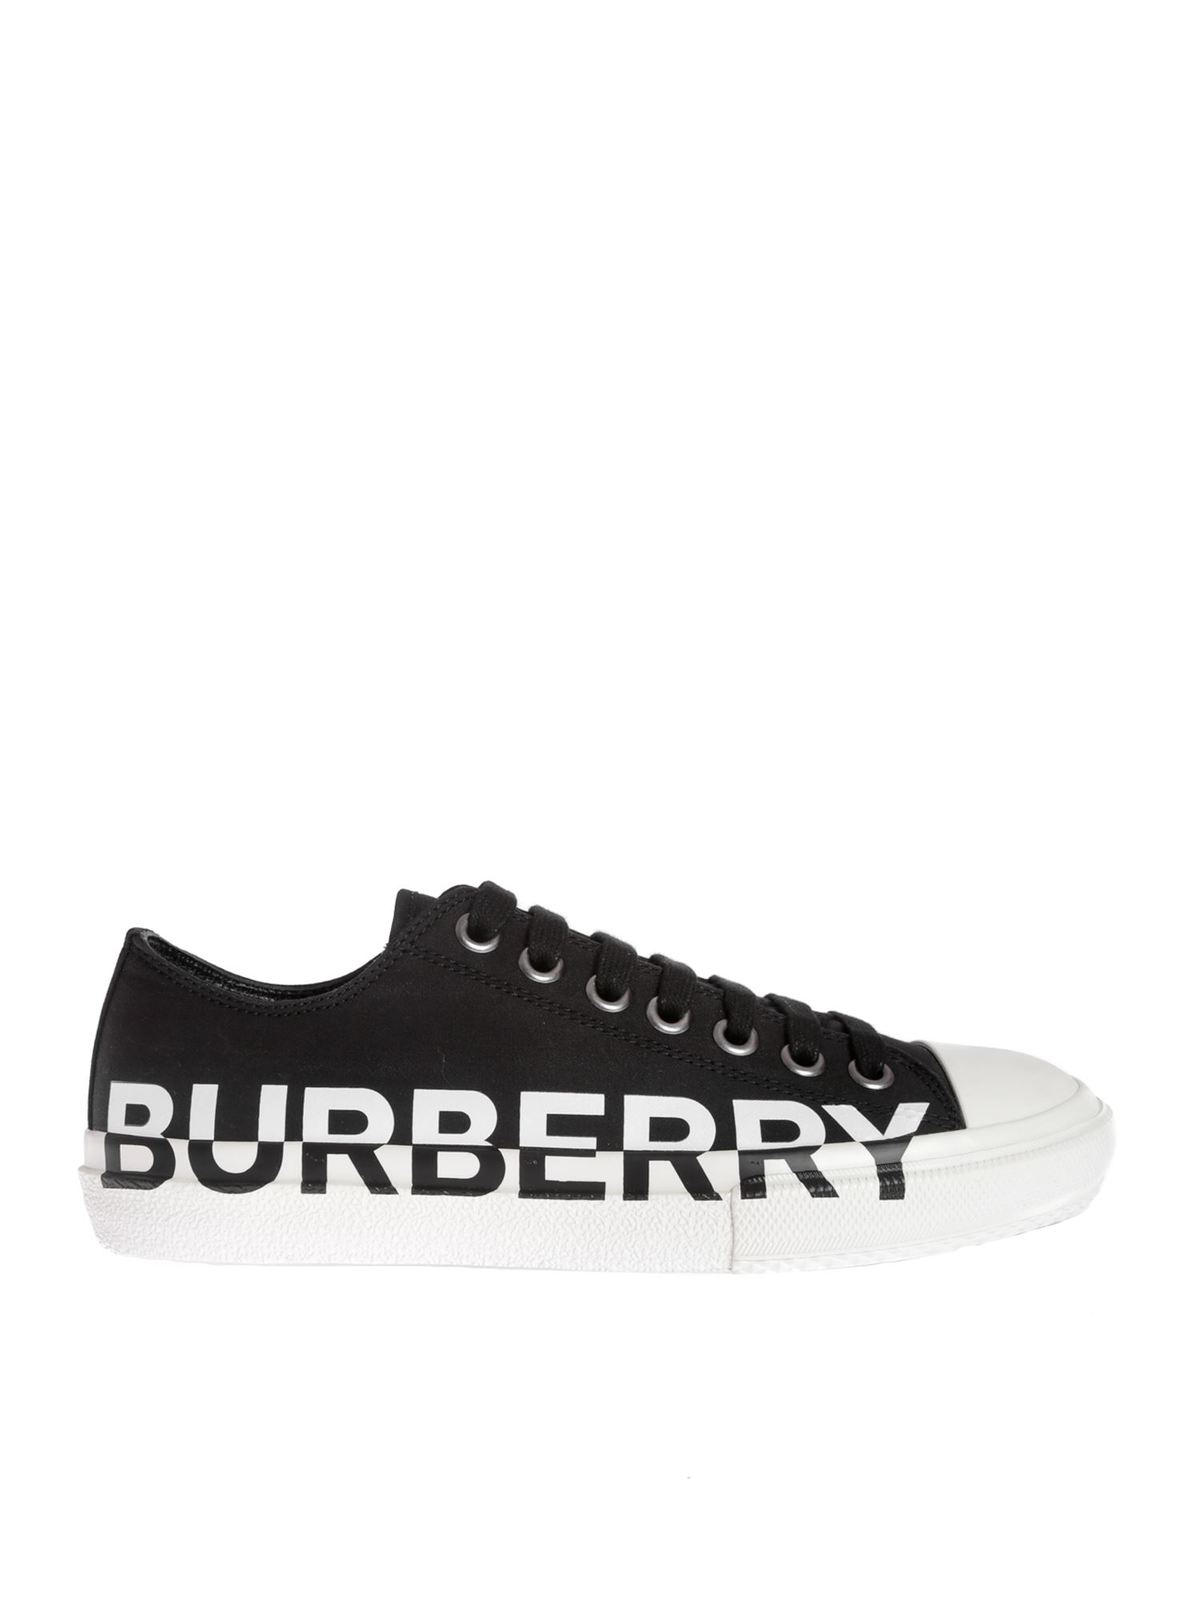 Trainers Burberry - Larkhall sneakers in black - 8018270 